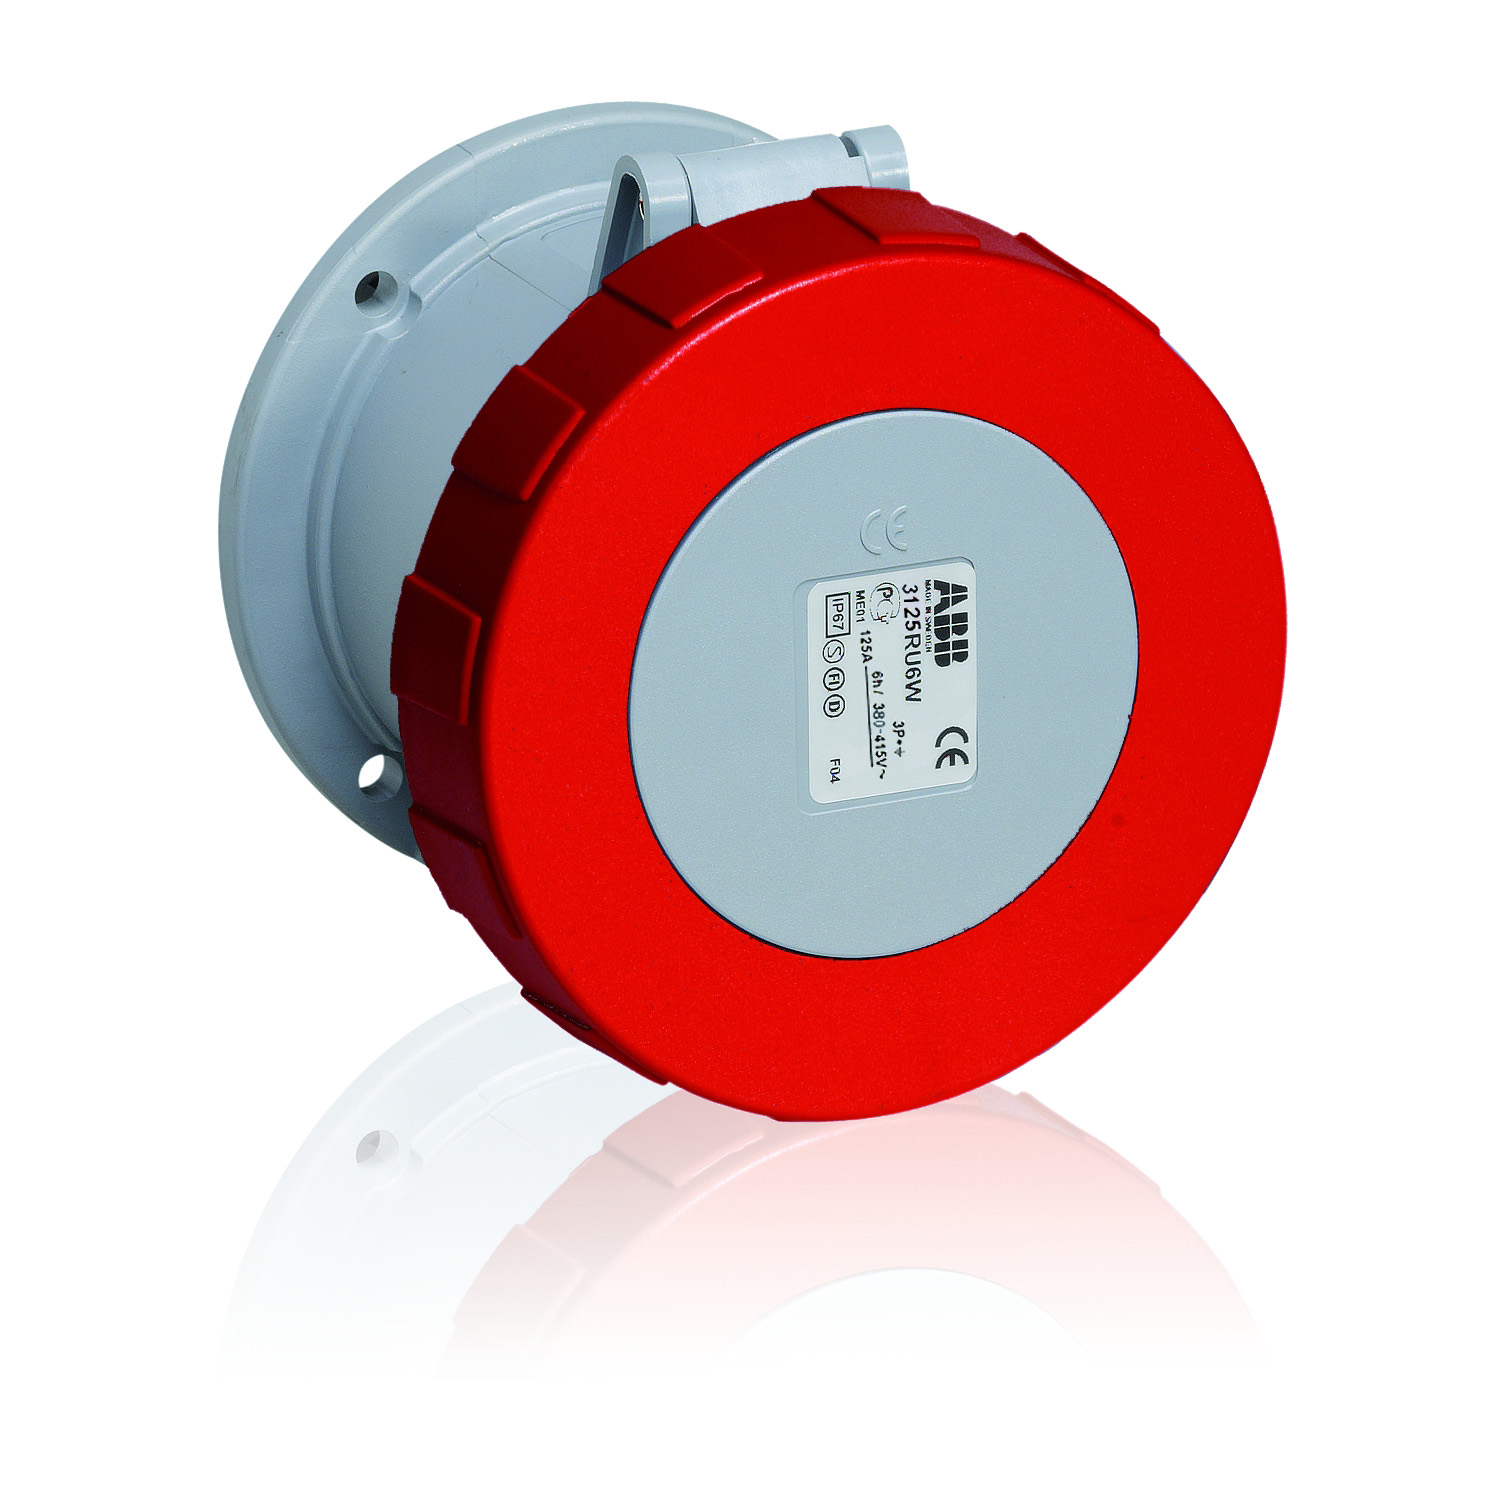 ABB ABB4100R7W Pin and Sleeve Receptacle